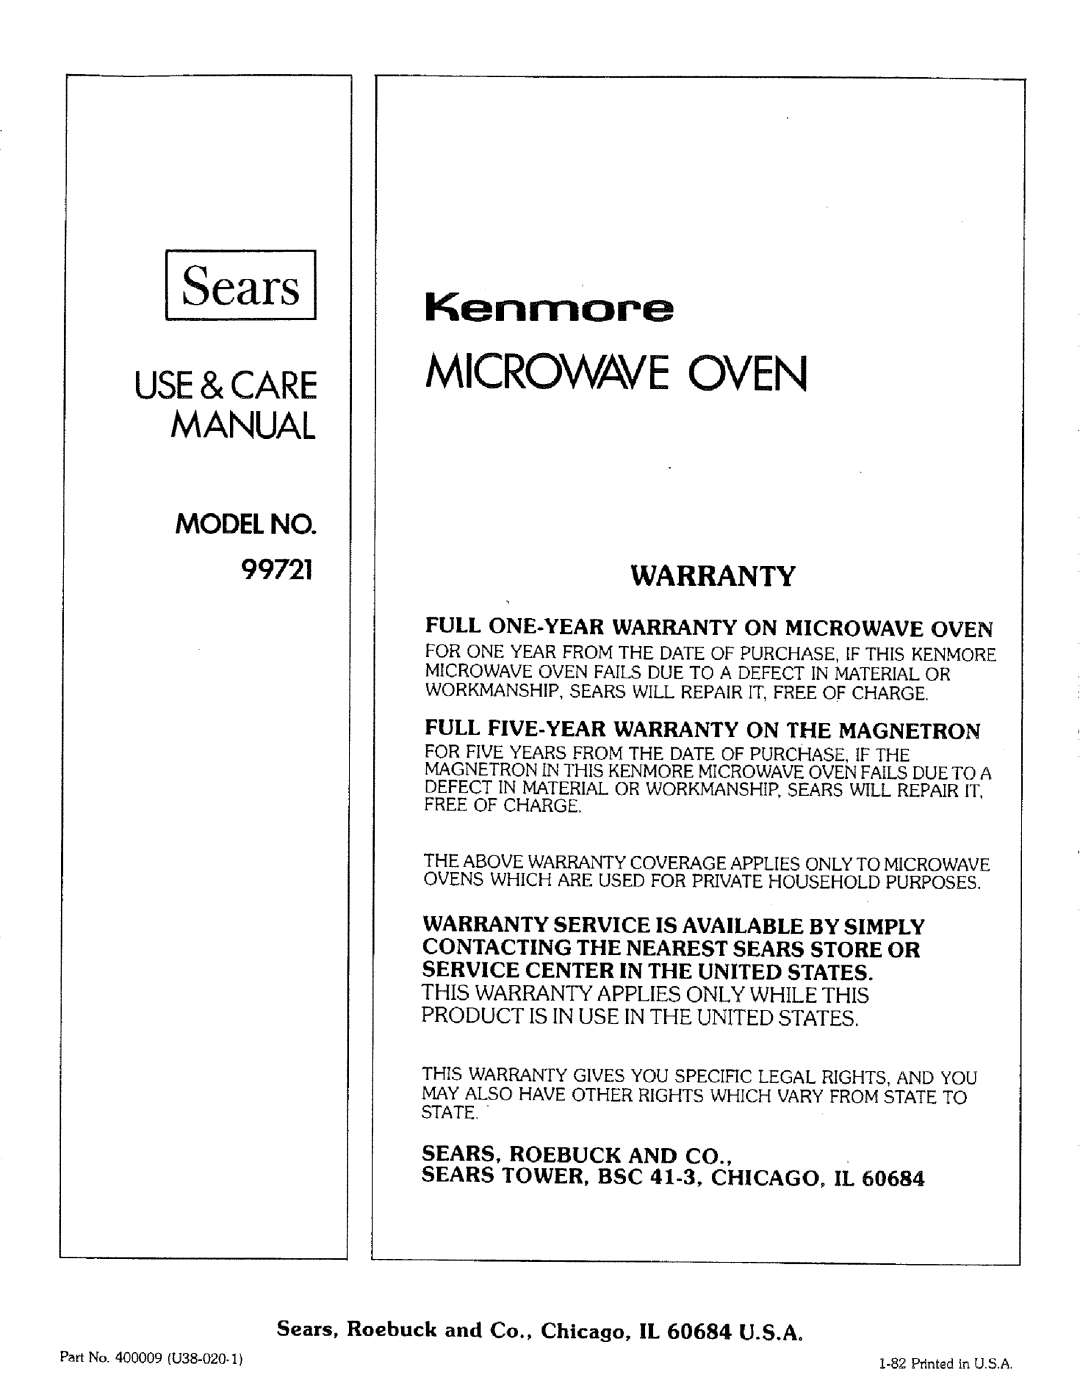 Kenmore 99721 Microwaveoven, Use& Care Manual, Model No, Warranty, Sears, Kenmore, Full Five-Yearwarranty On The Magnetron 